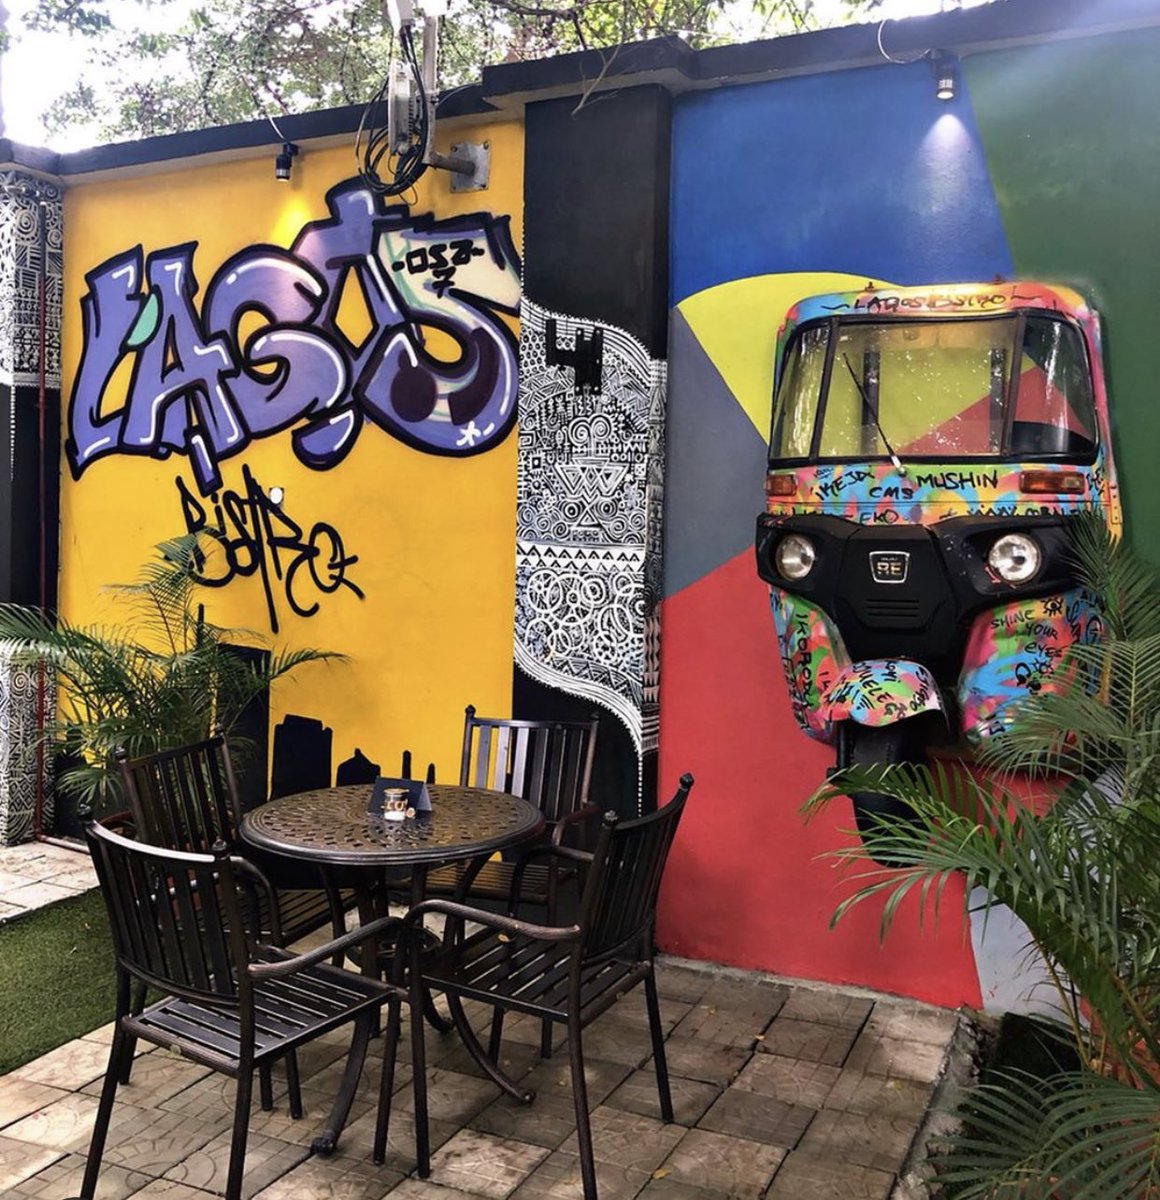 LAGOS BISTRO . Called Lagos Bistro but located in the heart of Abuja. Has a typical Lagos feel and a lot of art. There’s a Danfo bar and kekenapeps hanging on the walls and a lot of funny writings. Nice food and a nice outdoor section. Picture perfect too.